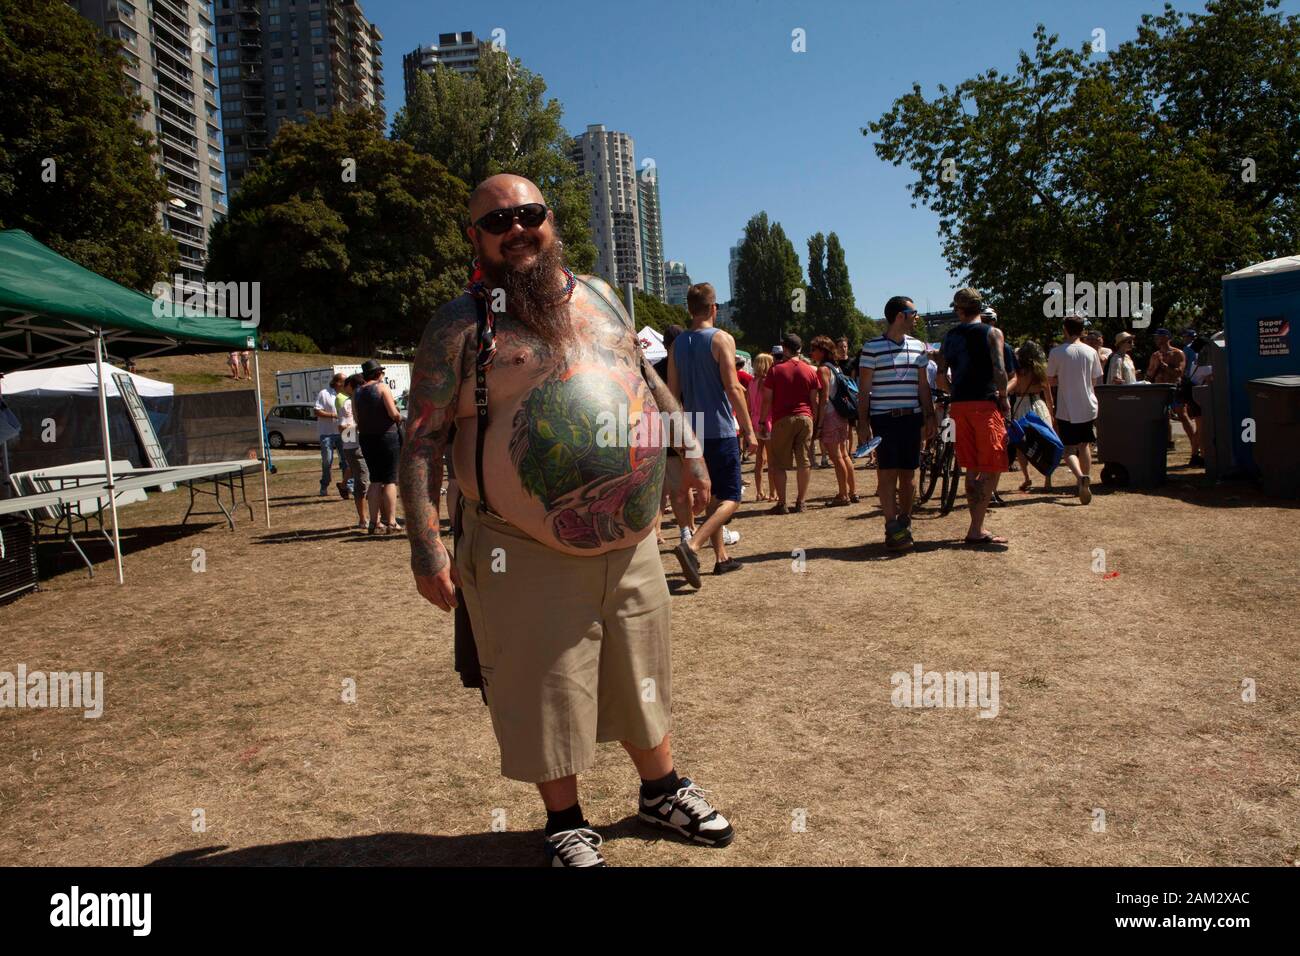 Pride participant showing off full body art, high rise buildings in background, Vancouver Pride Festival 2014, Vancouver, Canada Stock Photo